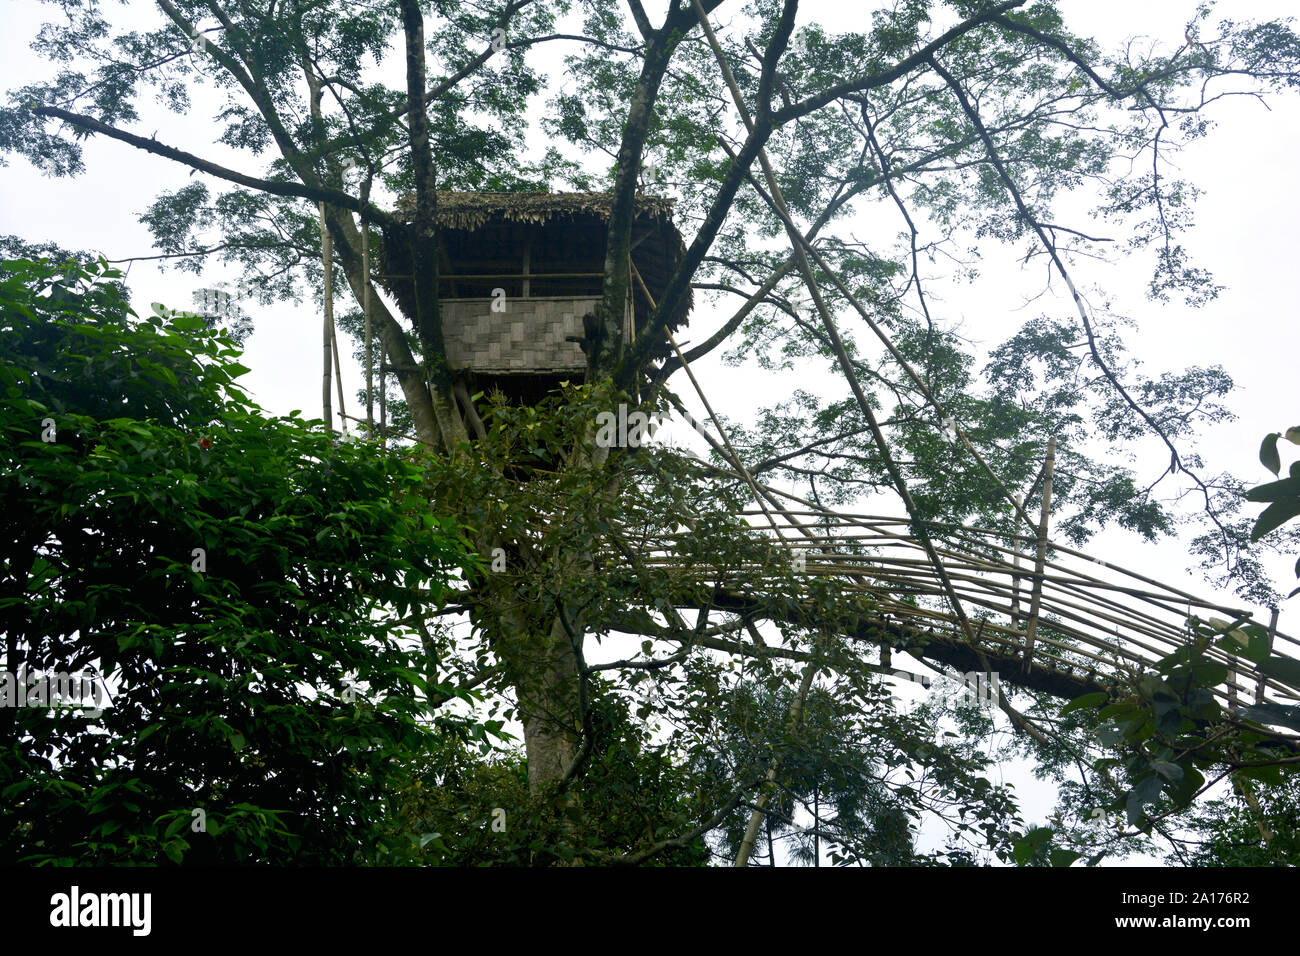 Close up of a tree house made of bamboos with roof of straw on the branches of  a tree in Mawlynnong village of shilling with bamboo bridge Stock Photo